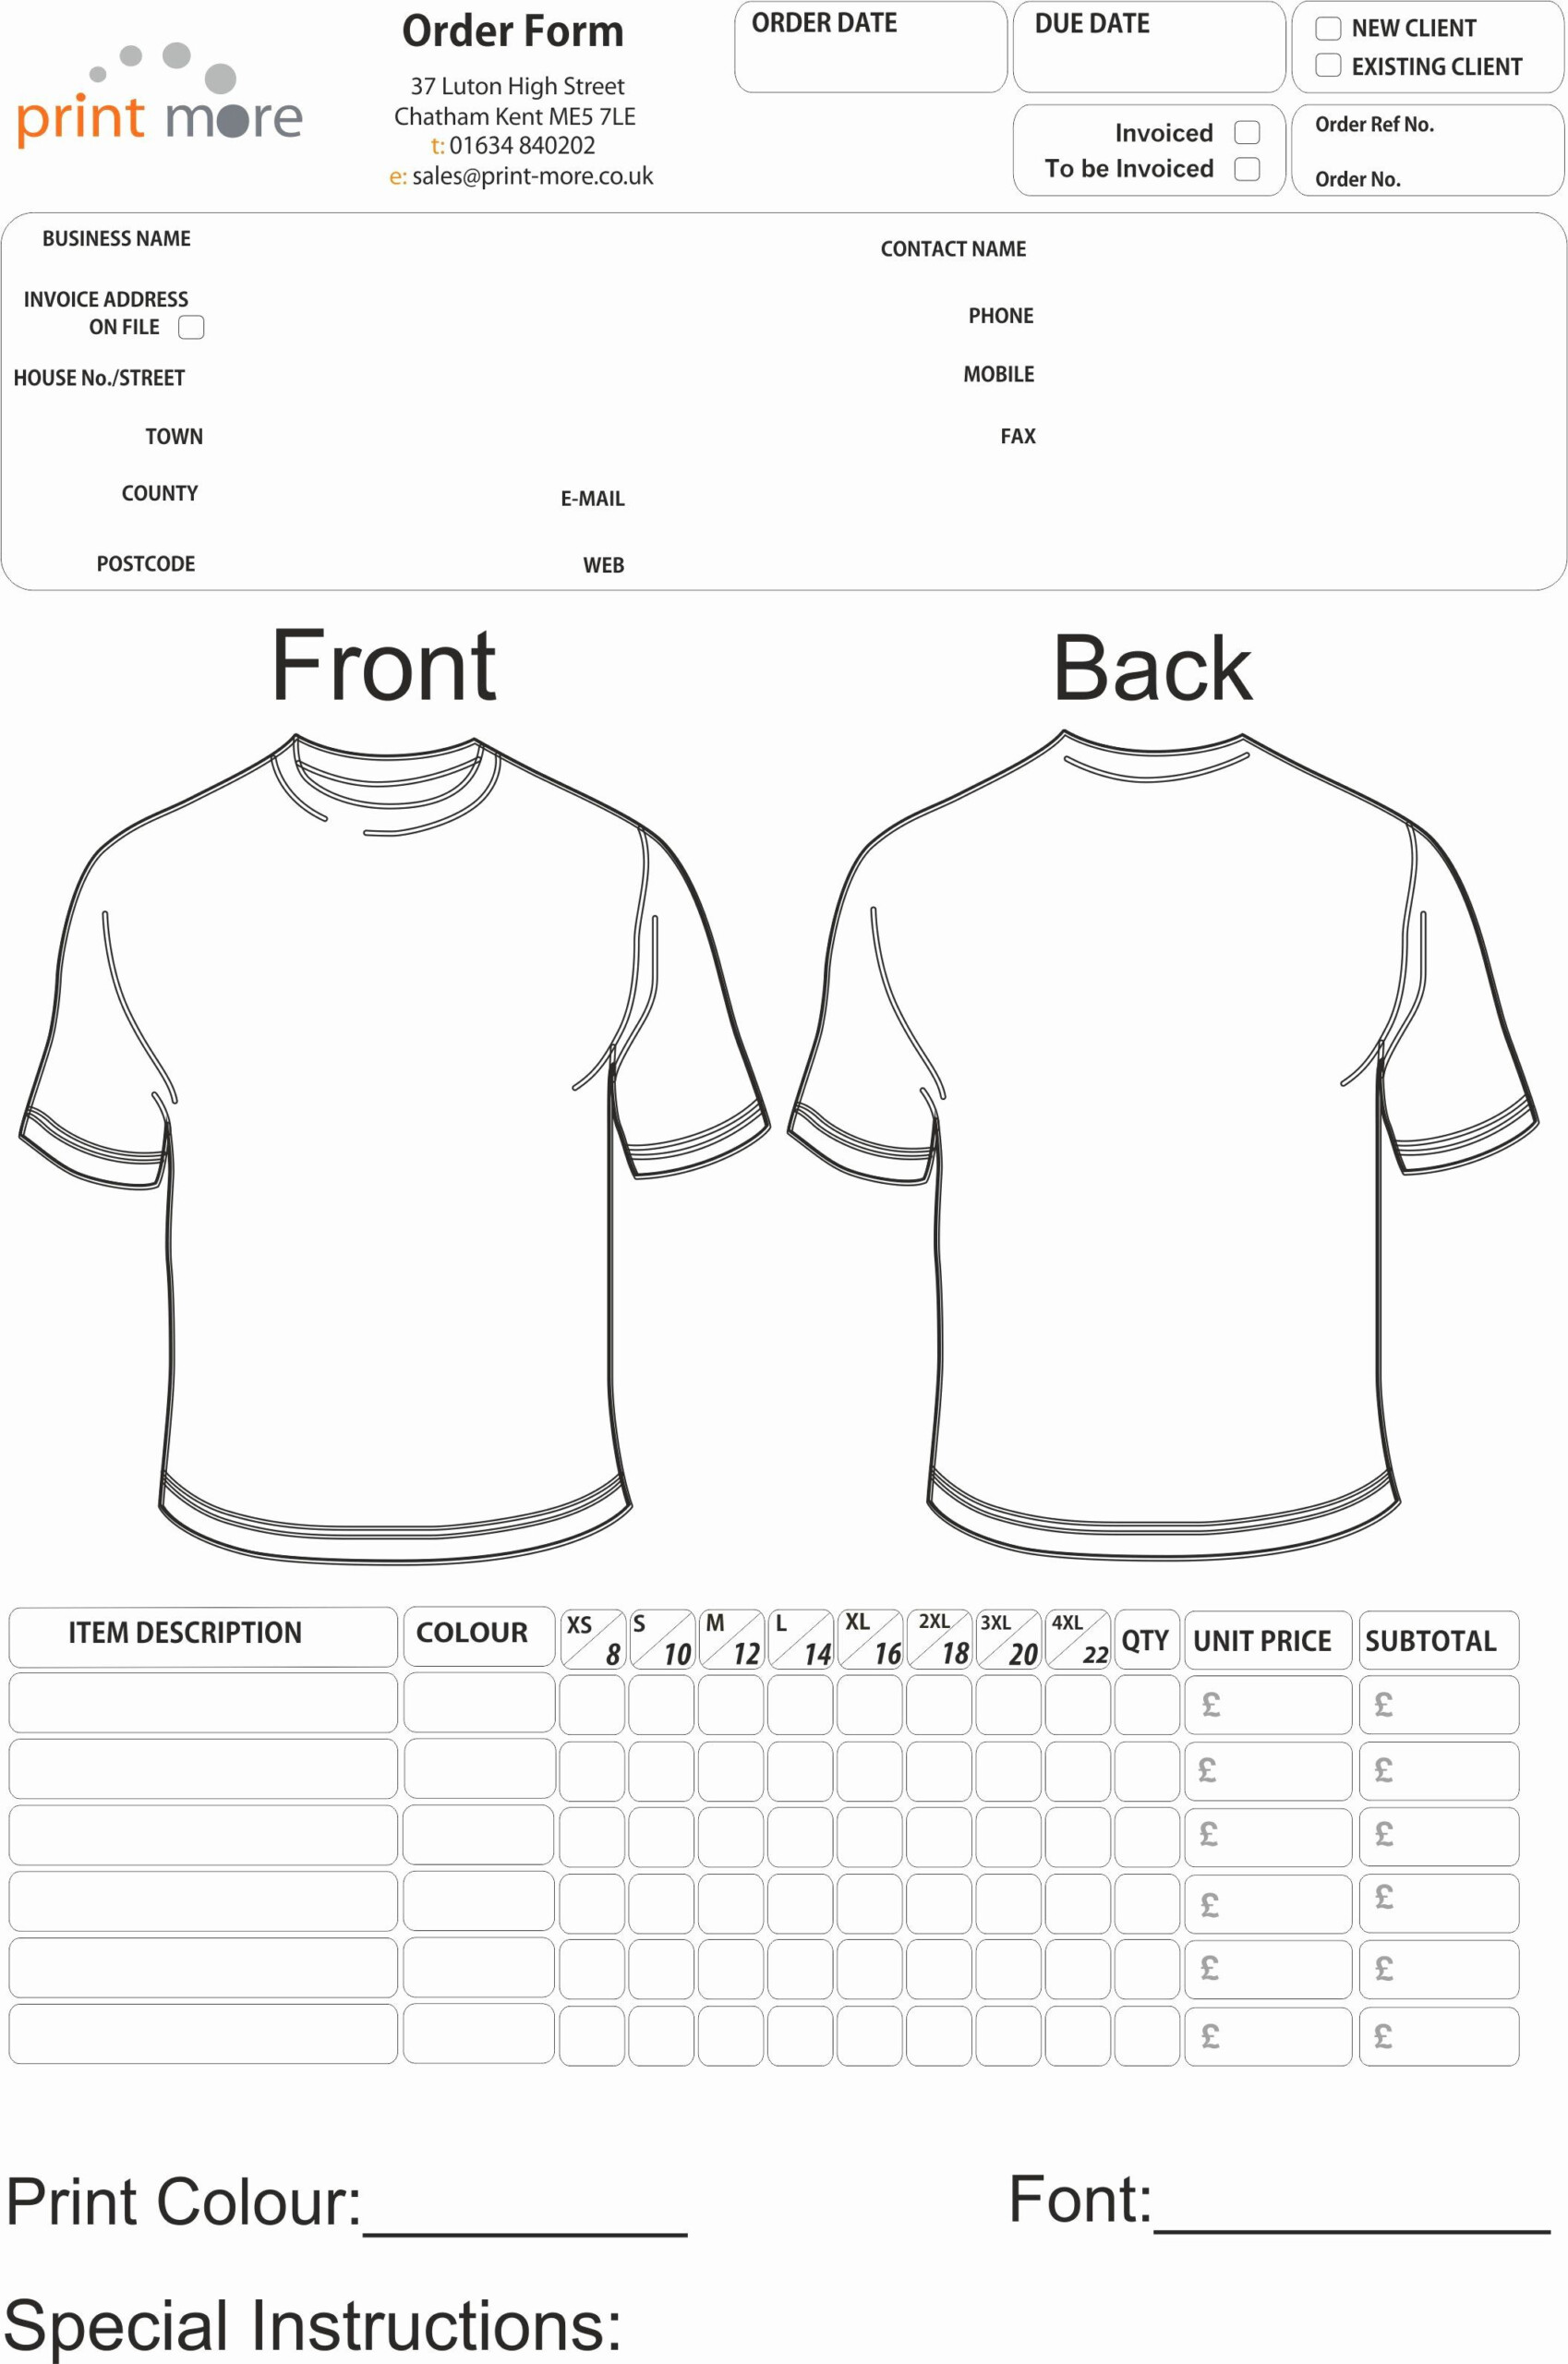 Pre Order Form Template Lovely T Shirt Order Form Template In 2020